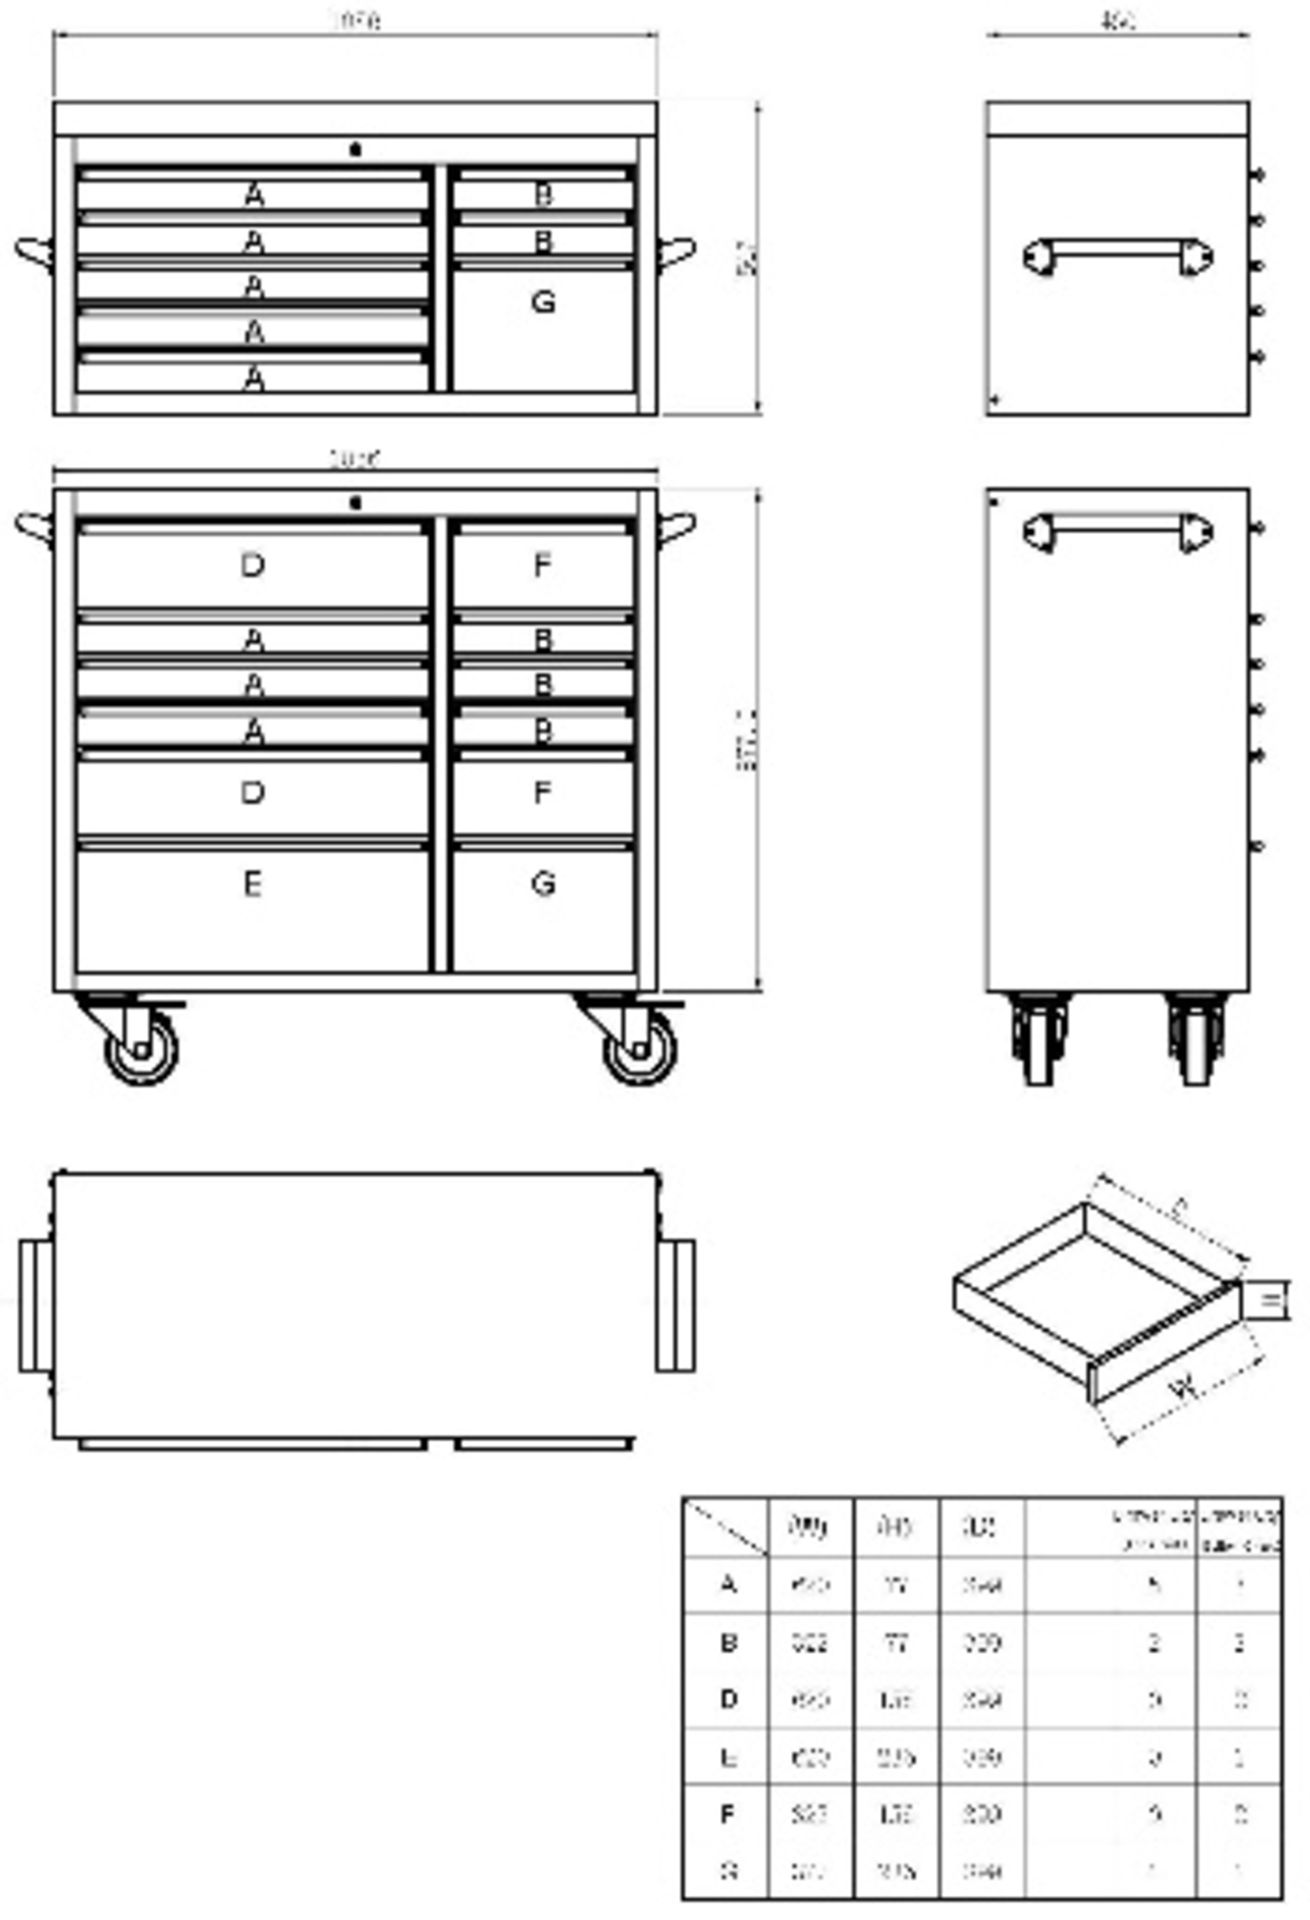 42 inch 20 draw stainless steel storage unit 1056mm W x 1550mm H 460mm D NEW and BOXED Includes: - Image 2 of 2